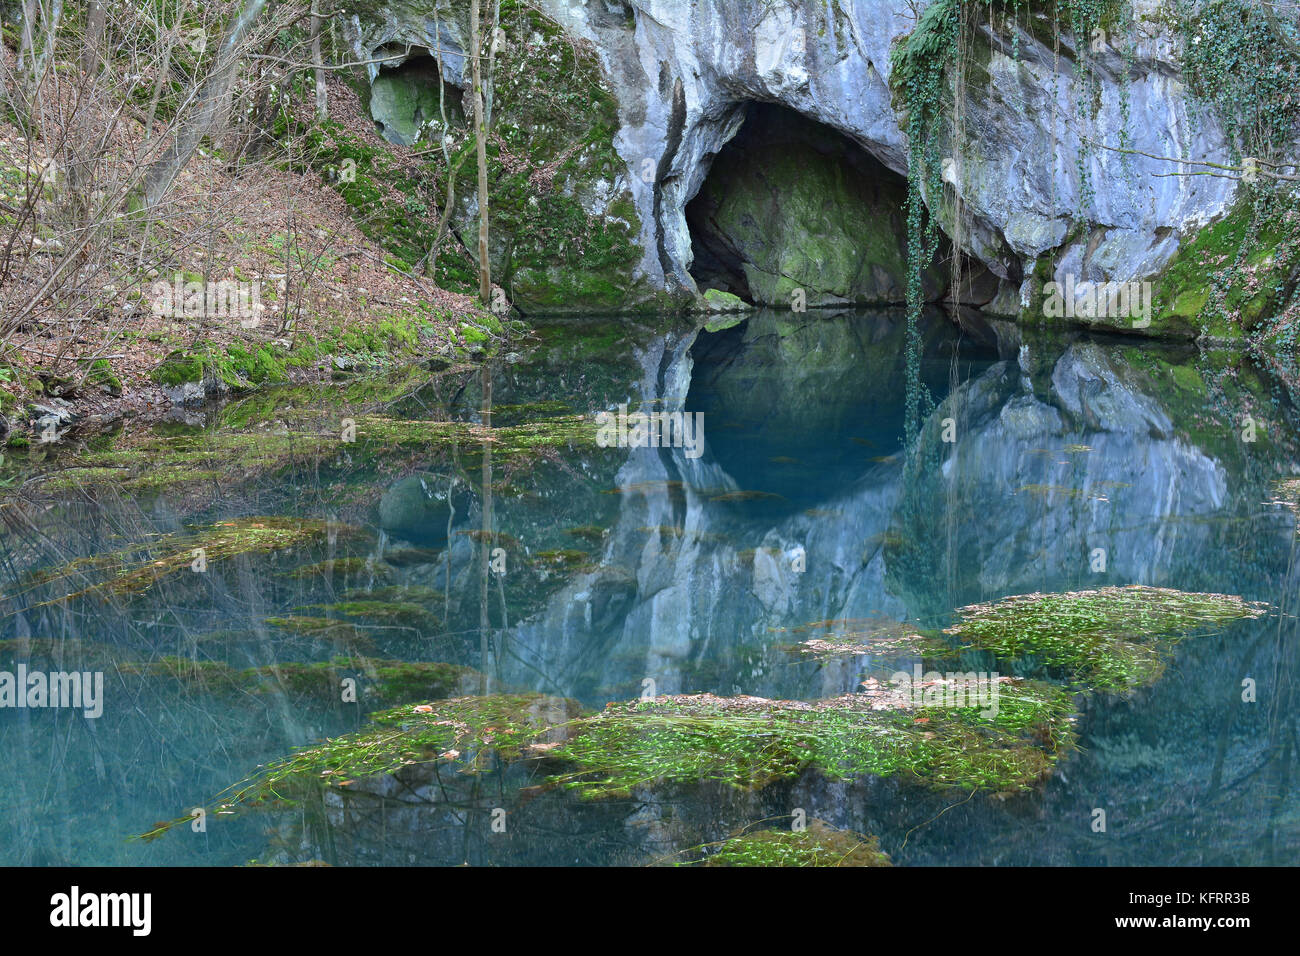 Springhead and clear, turquoise water of Krupaja river running out from the cave, Krupajsko vrelo, Serbia Stock Photo